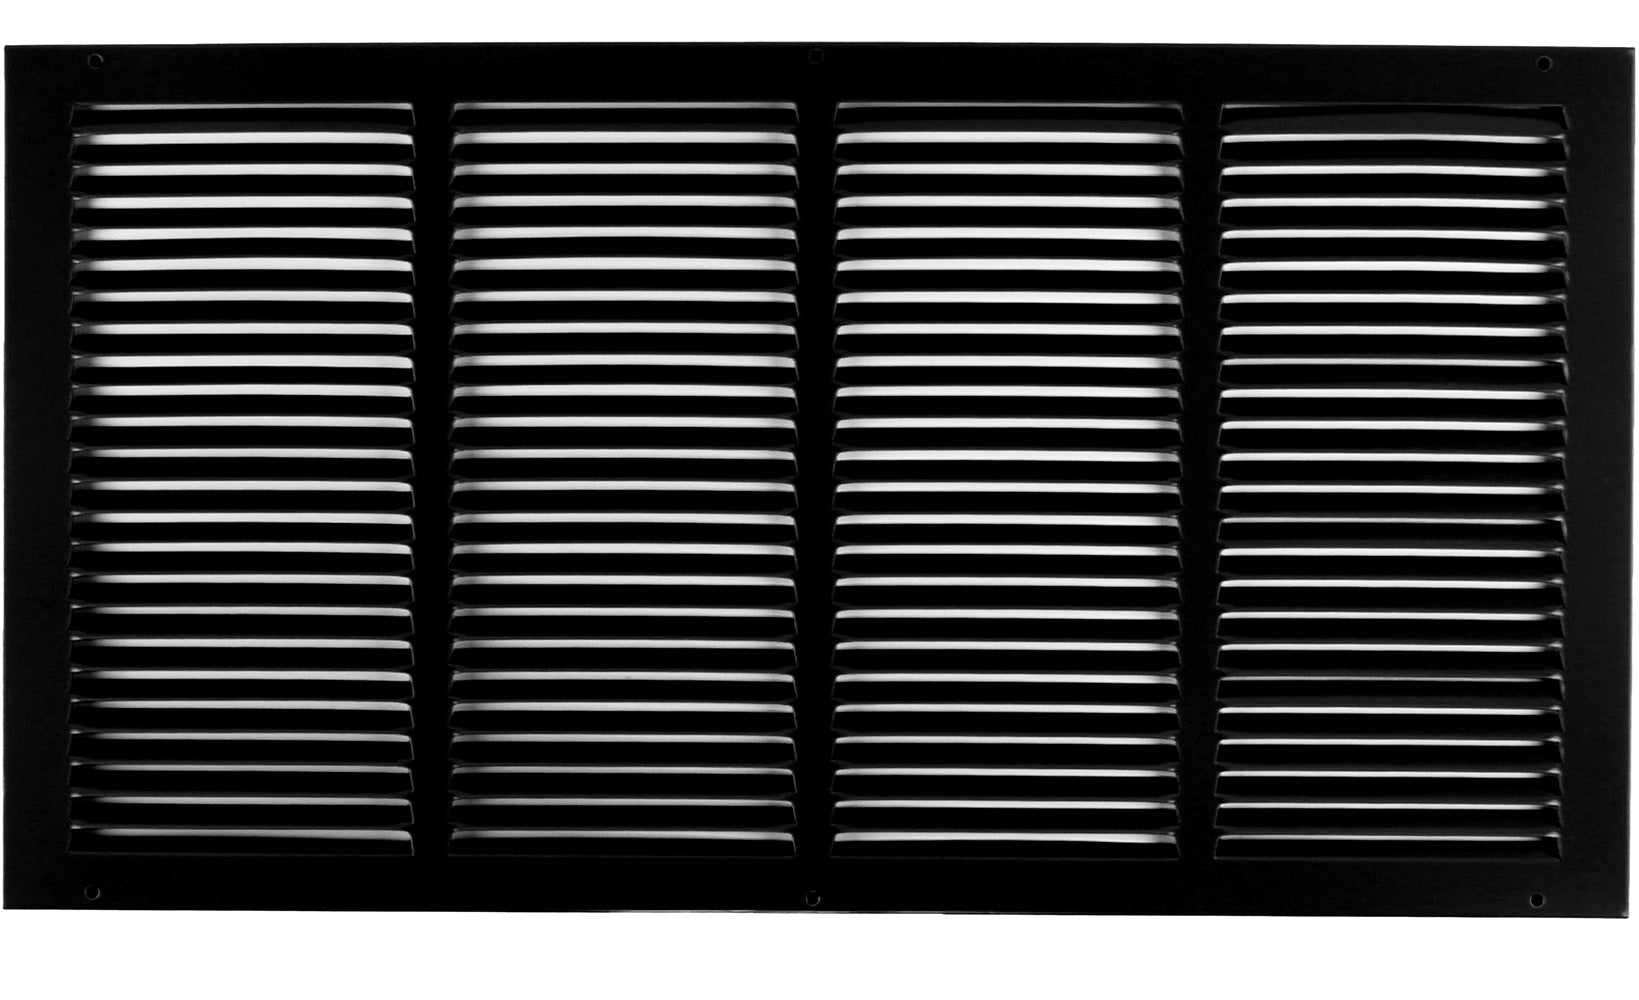 24" X 12" Air Vent Return Grilles - Sidewall and Ceiling - Steel